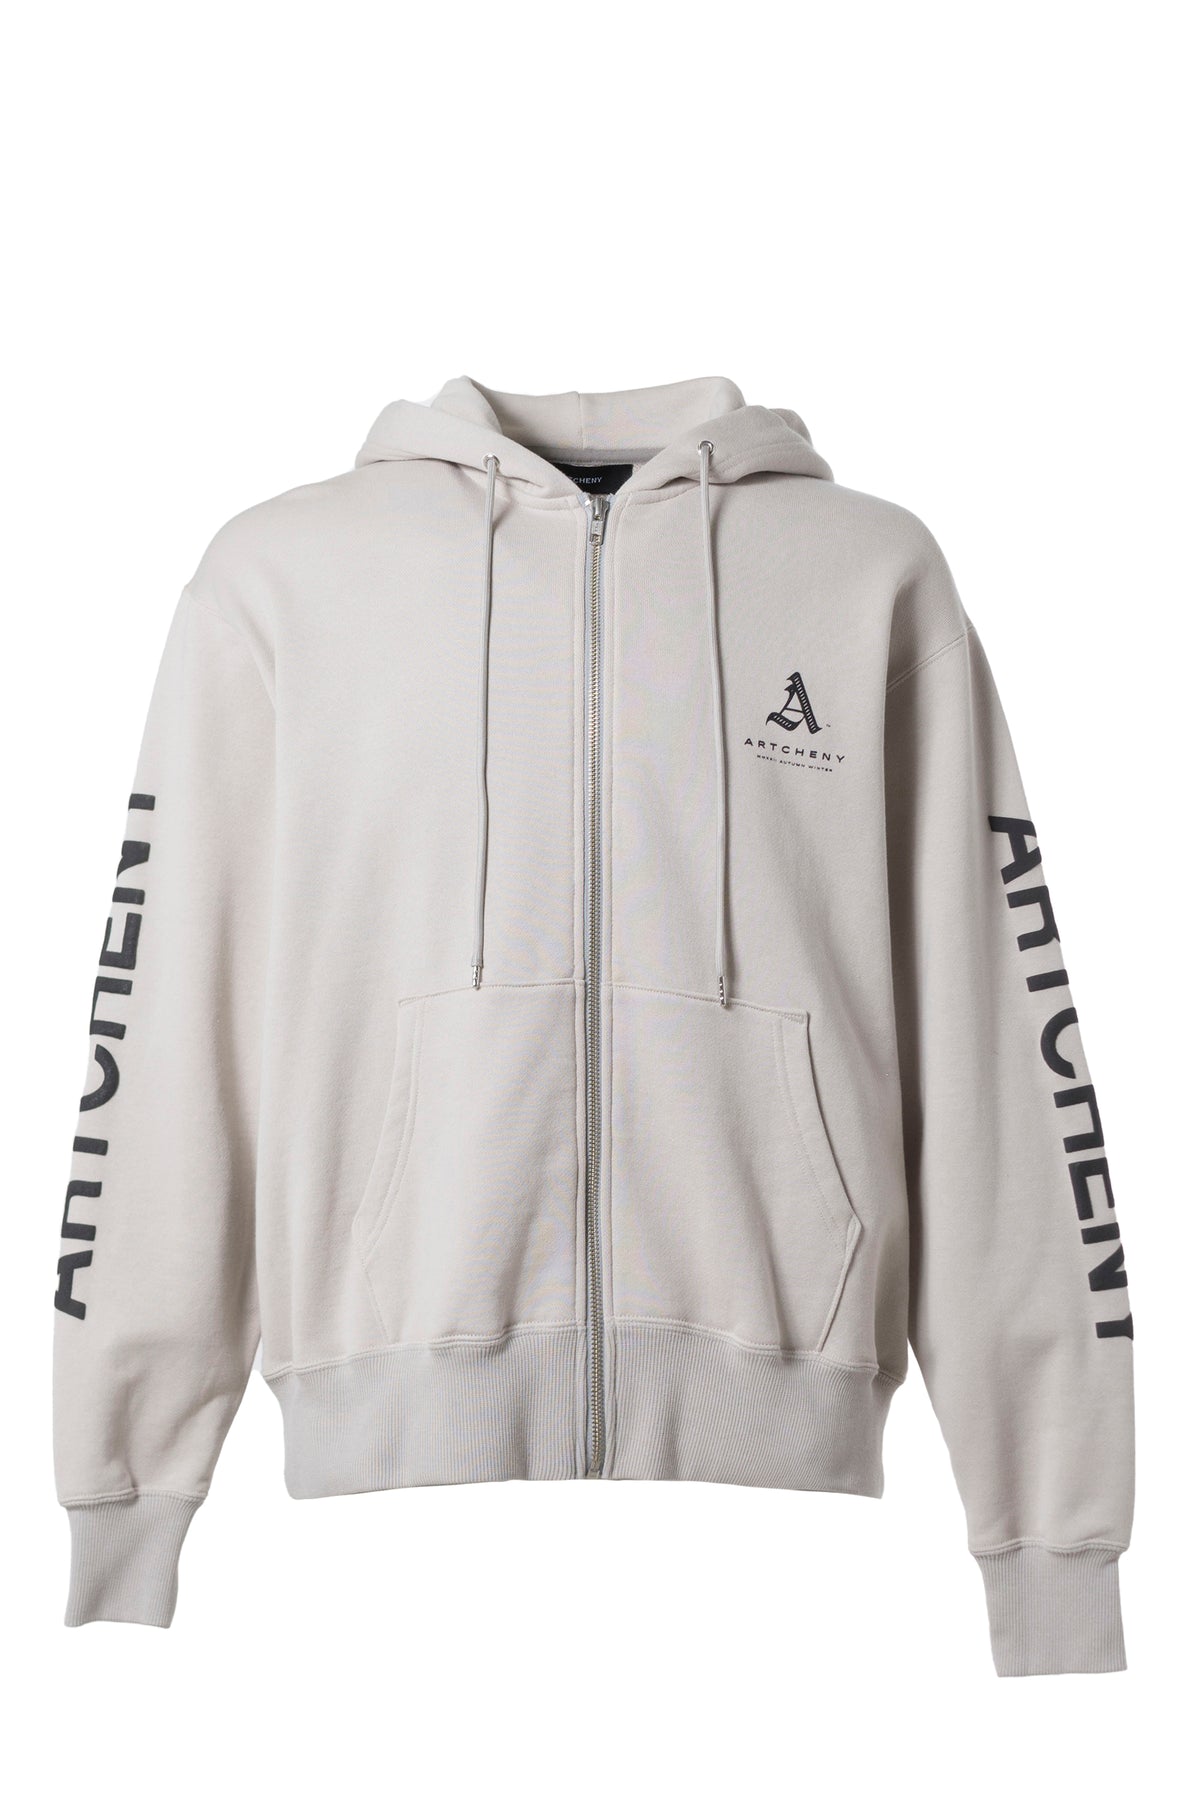 ARTCHENY ZIP HOODIE HELL / GRY